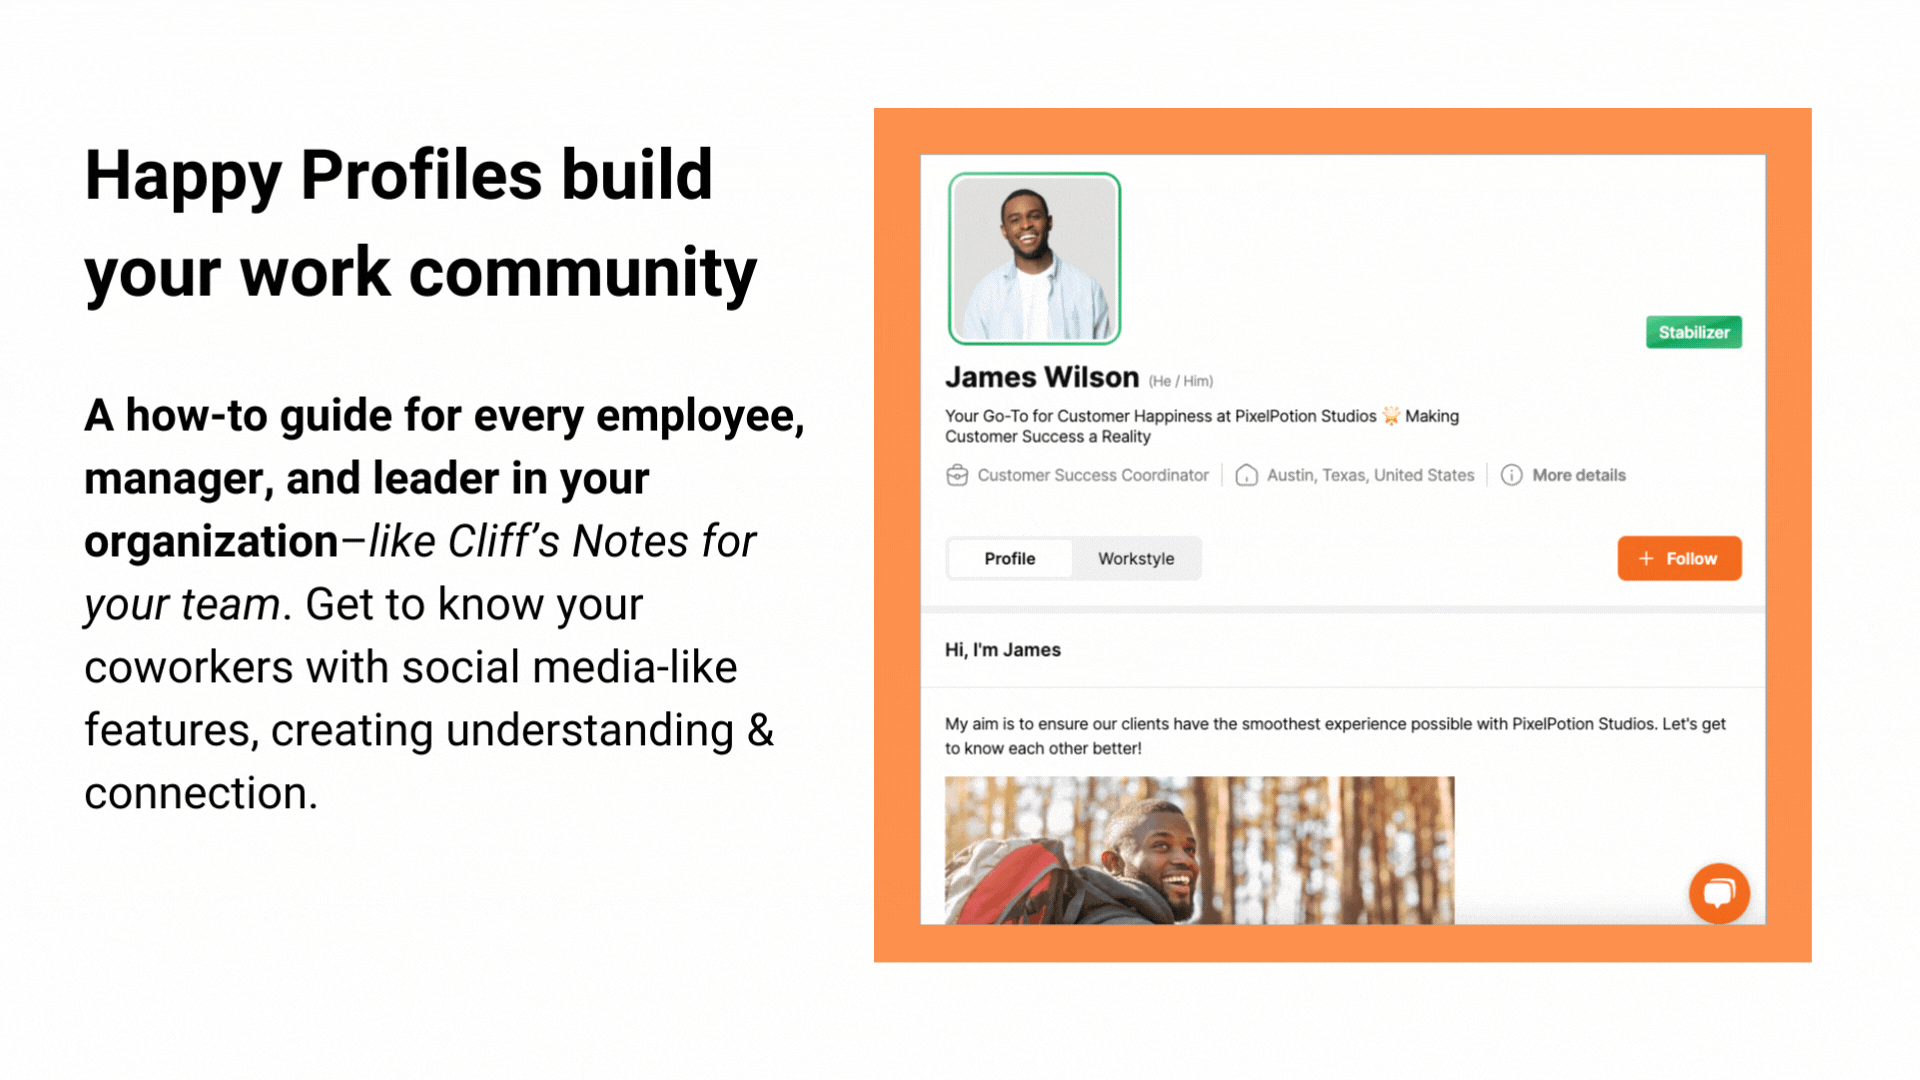 image of the Happy Profile next to text that reads "Happy Profiles build your work community. A how-to guide for every employee, manager and leader in your organization - like Cliff's Notes for your team. Get to know your coworkers with social media-like features, creating understanding & connection". " 